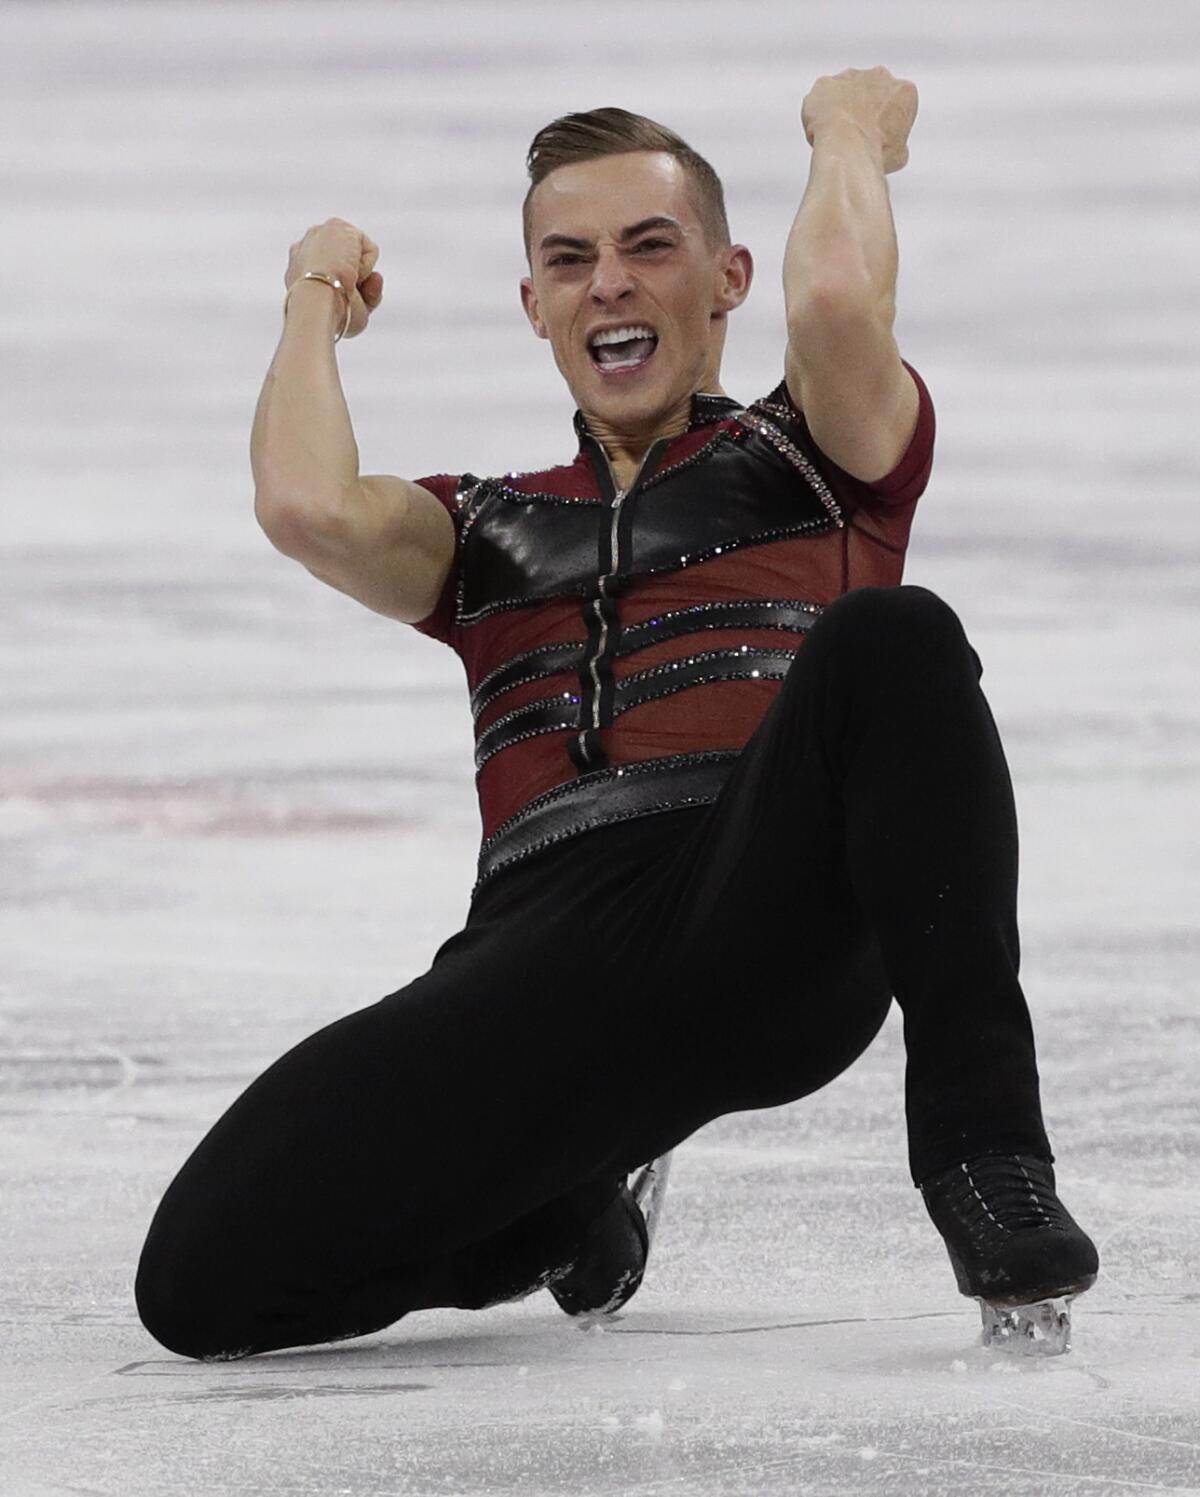 Adam Rippon reacts after his short program skate.